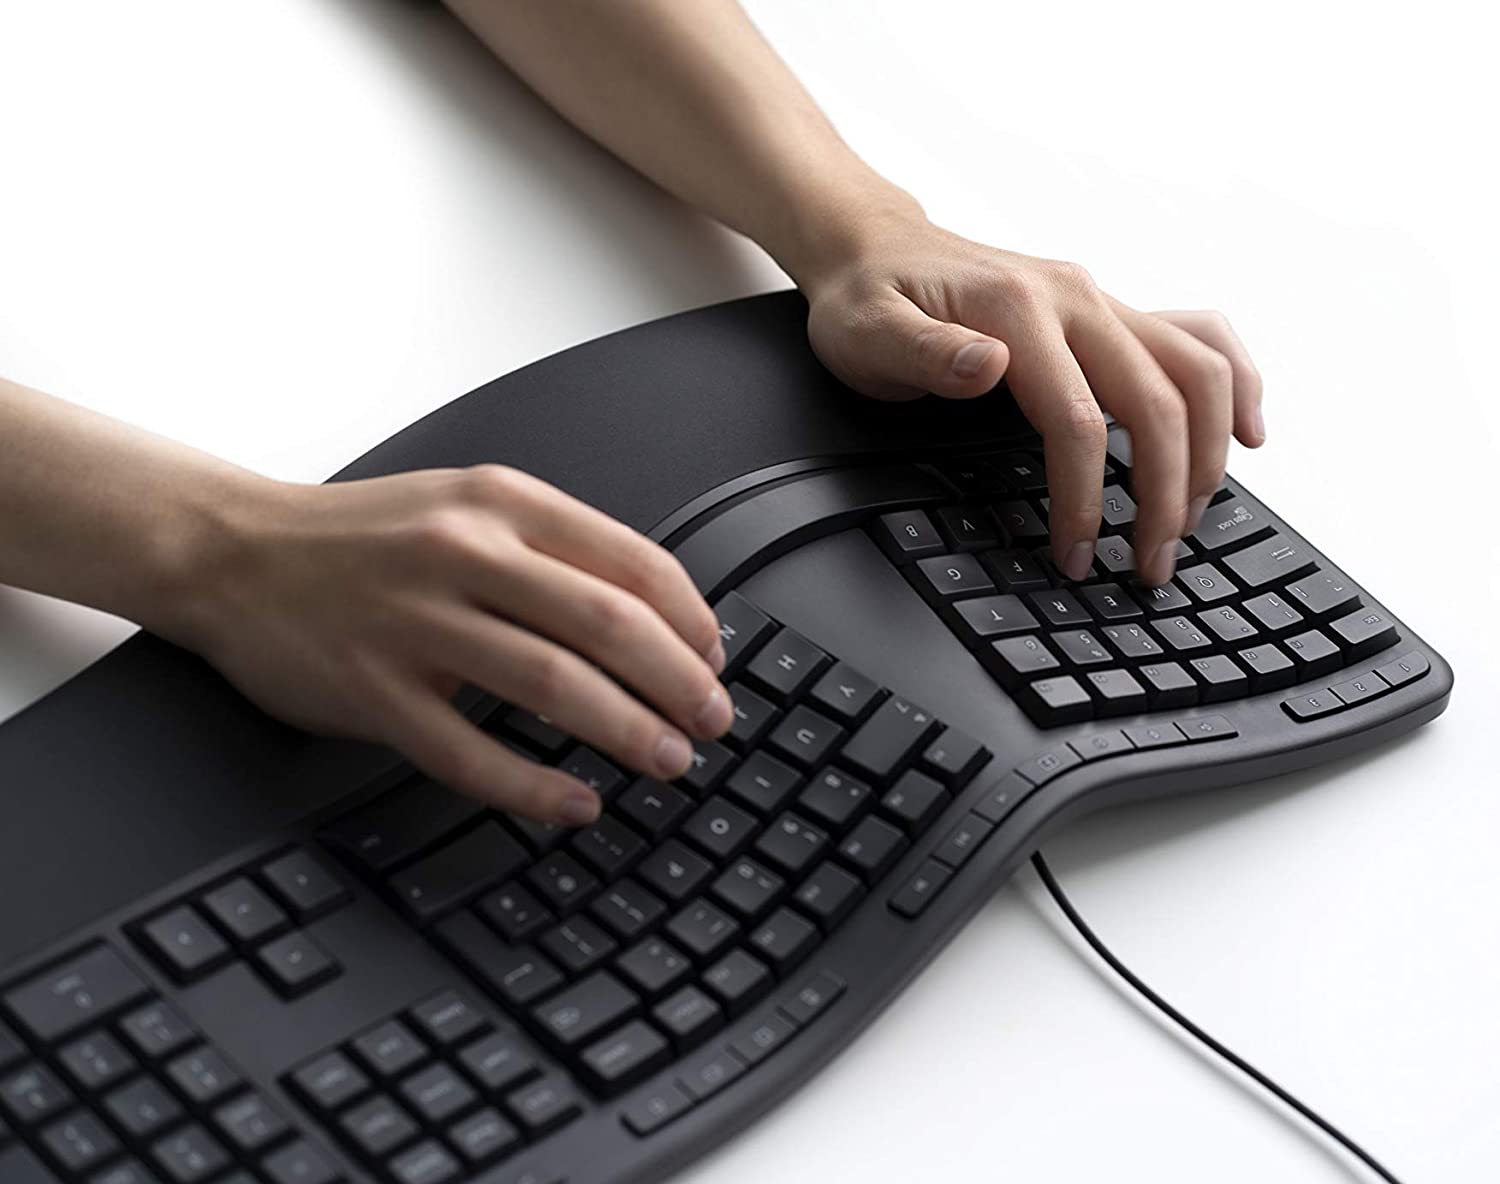 Our gaming keyboard recommendations include an ergonomic keyboard that allows you to play for longer with more comfort.